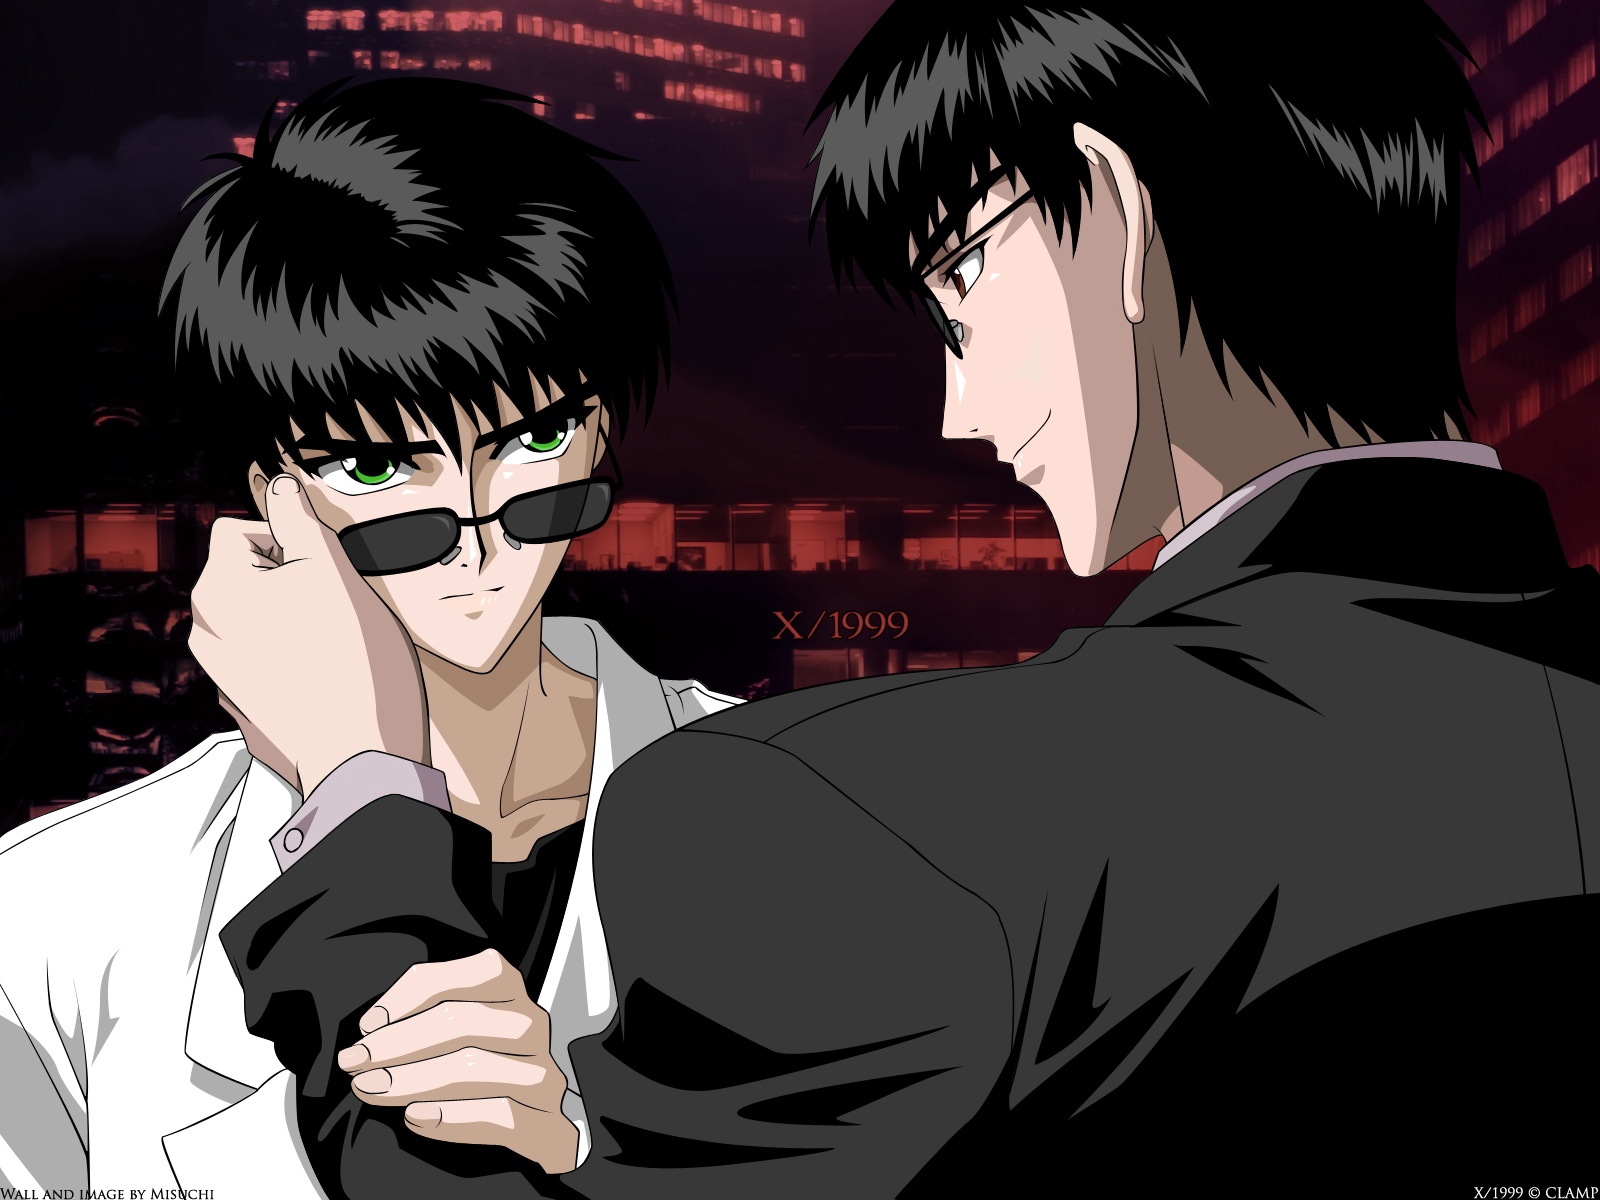 Wallpaper Guys, Sunglasses, Suits - Anime Characters With Black Sunglasses  - 1600x1200 Wallpaper 